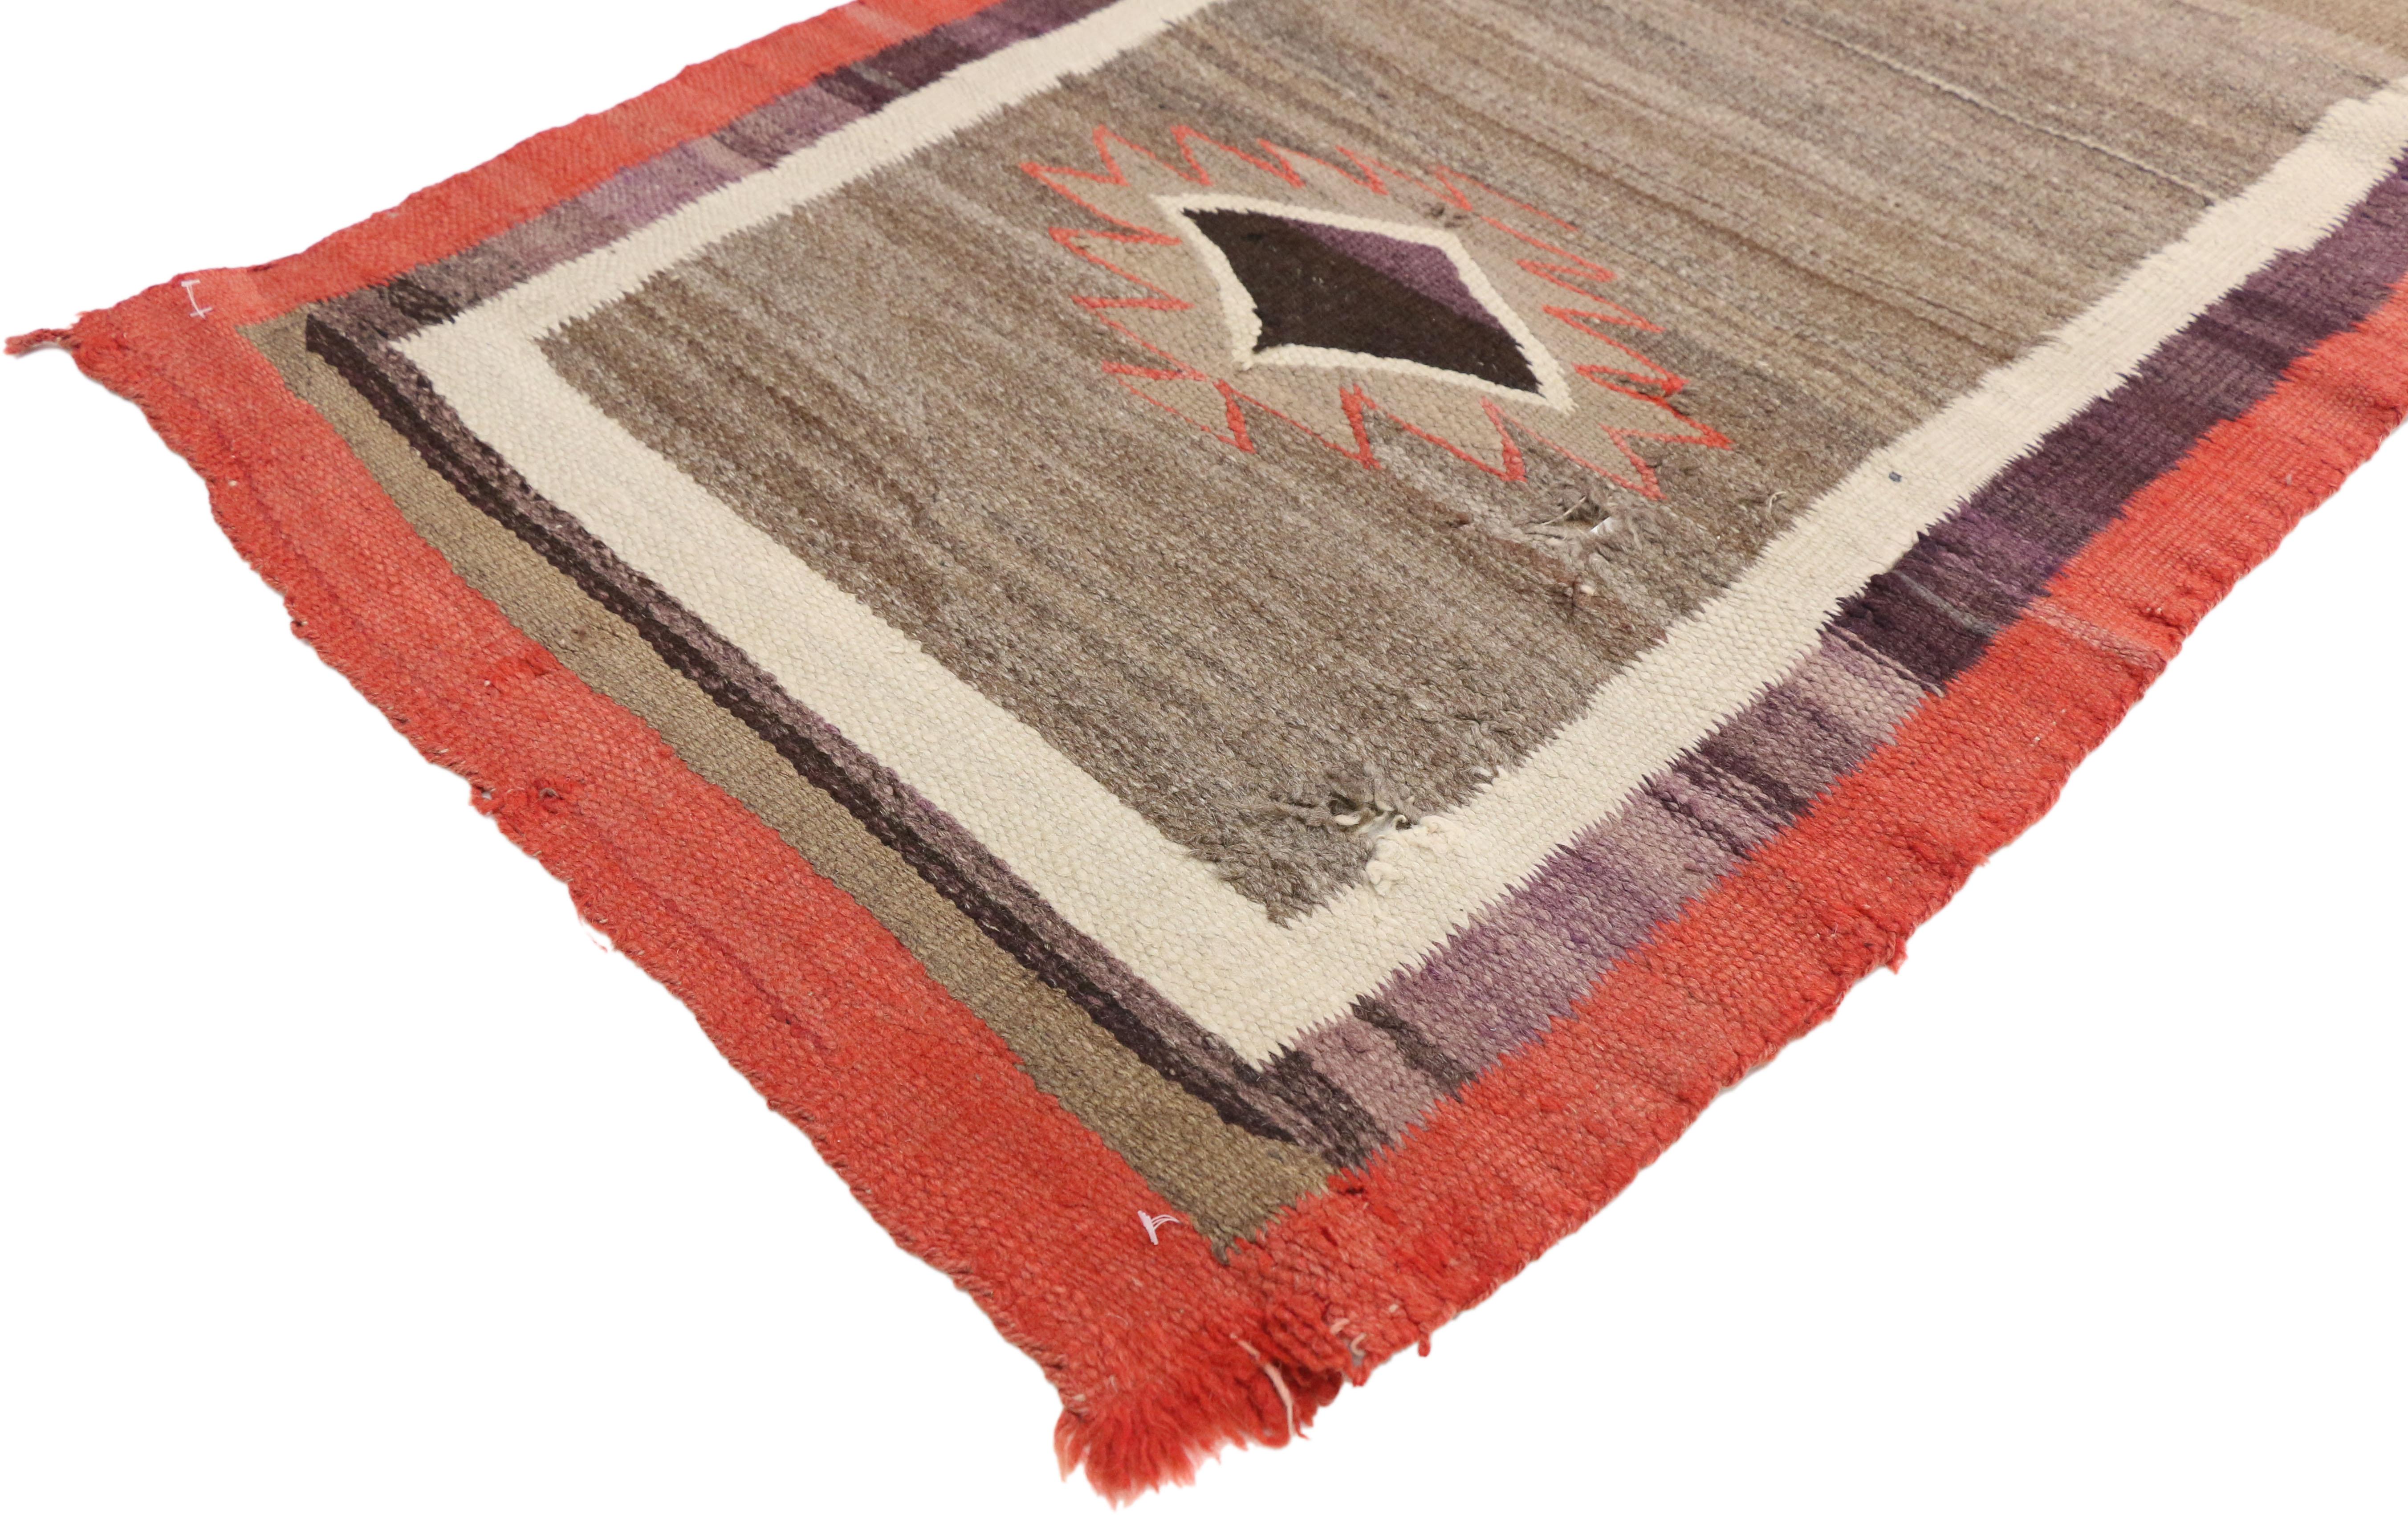 77145 Native American Antique Indian Navajo Kilim rug with Southwest style. Captivating and emanating Navajo vibes and Southwest style, this handwoven wool antique Native American Indian Kilim rug features two diamond amulets with serrated edges in